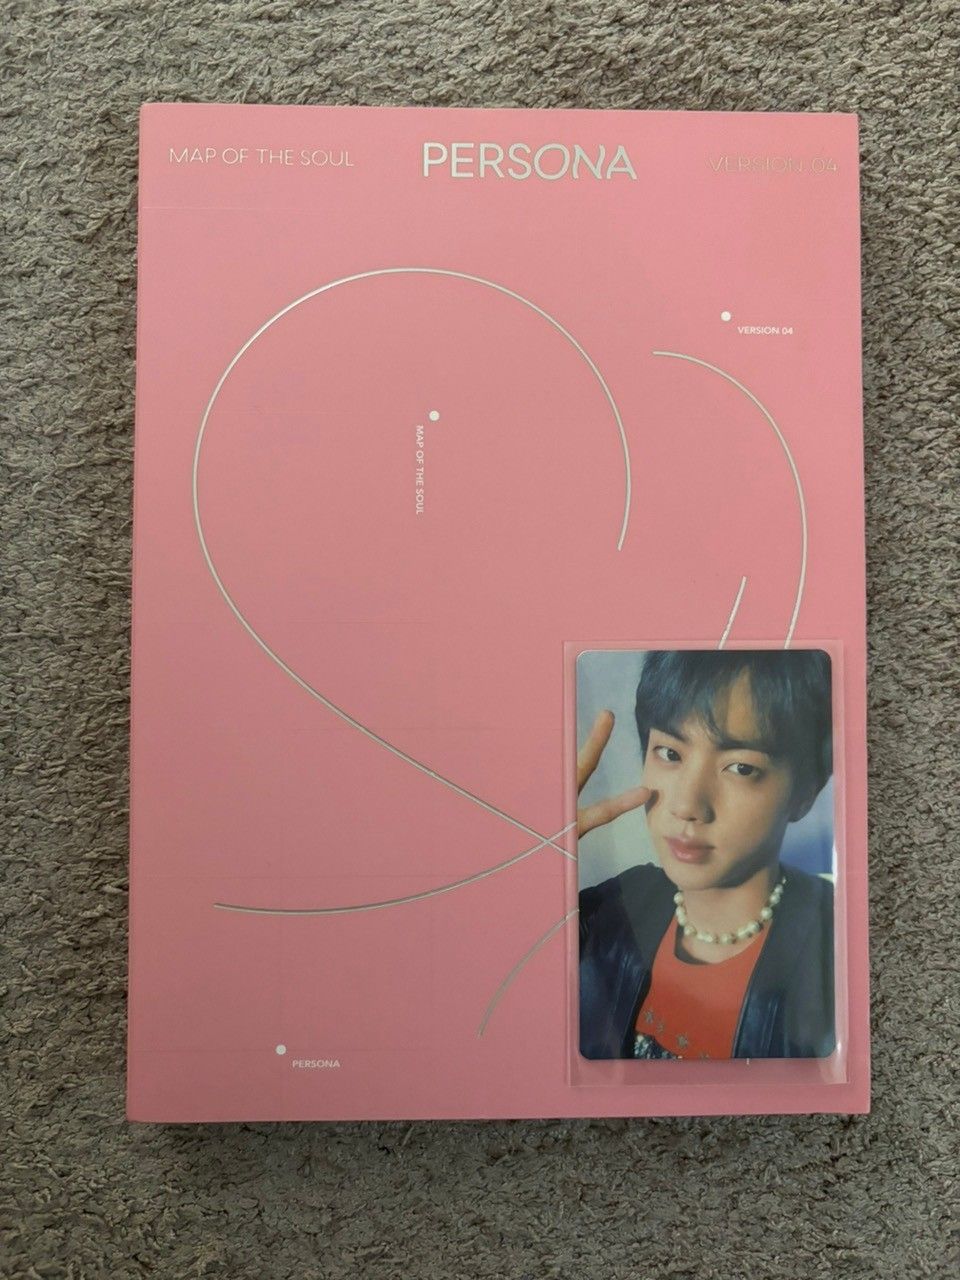 BTS - Map of The Soul: Persona (Version 04)